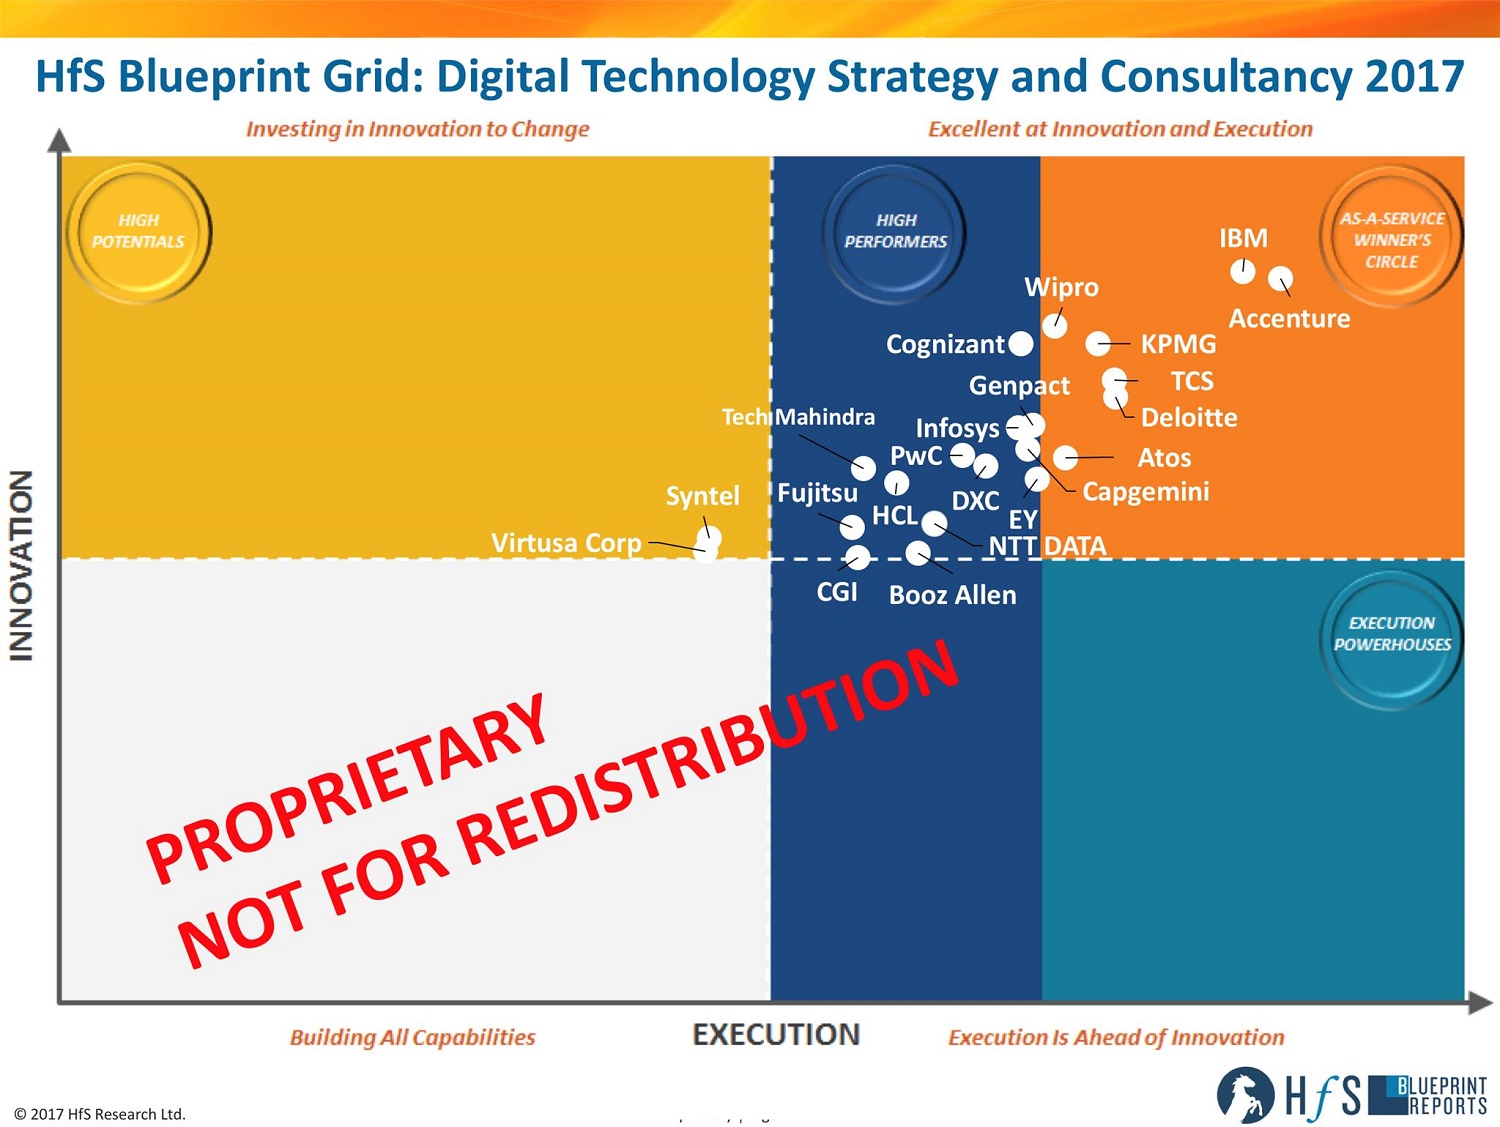 IBM, Accenture, KPMG, TCS, Deloitte, Wipro and Atos lead the 2017 Digital Tech Consulting blueprint